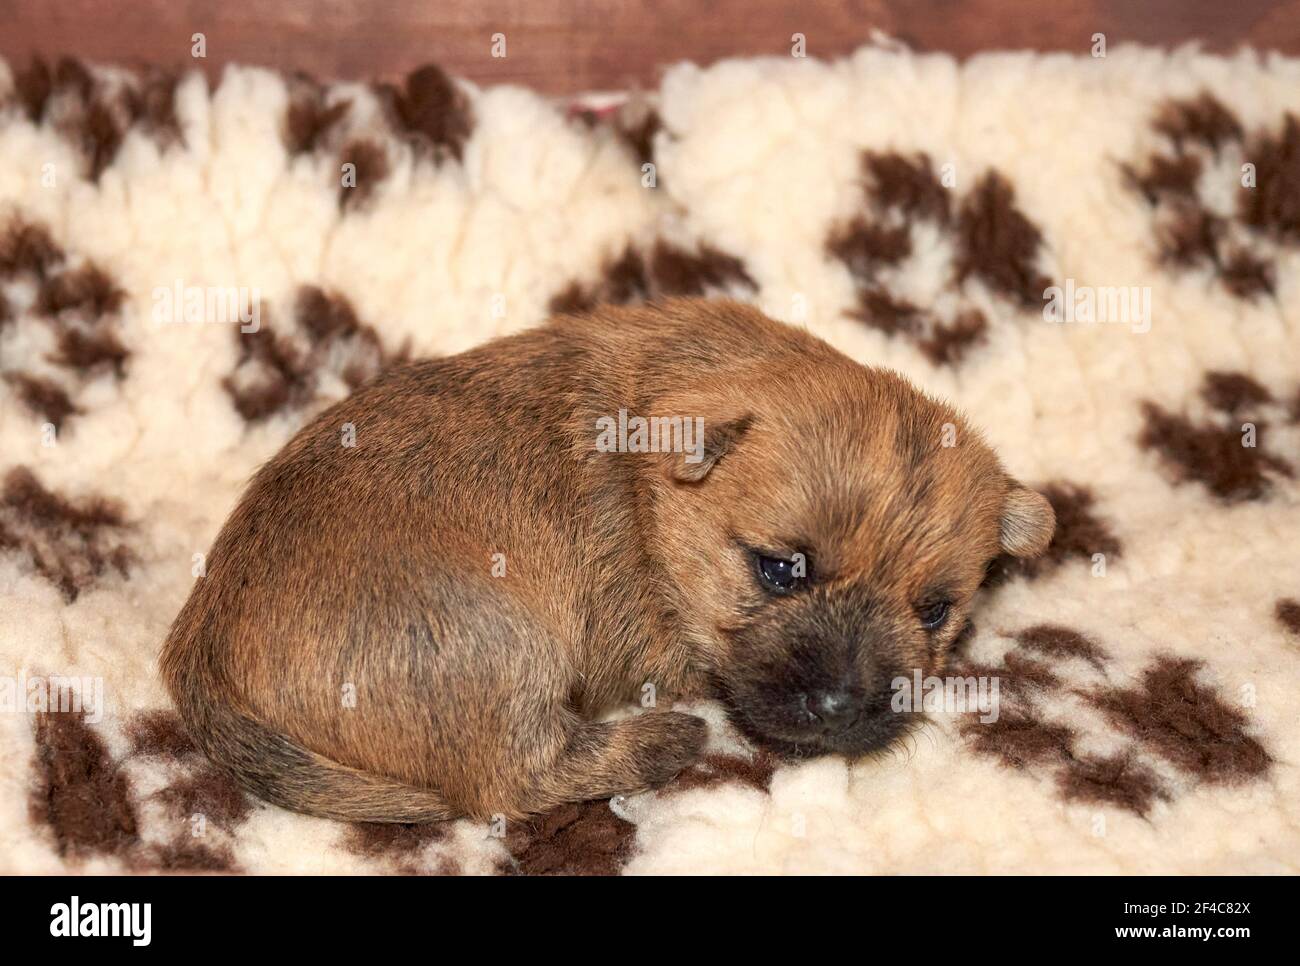 Cute Cairn Terrier puppy (14 days) snuggled up in it's whelping box. Stock Photo